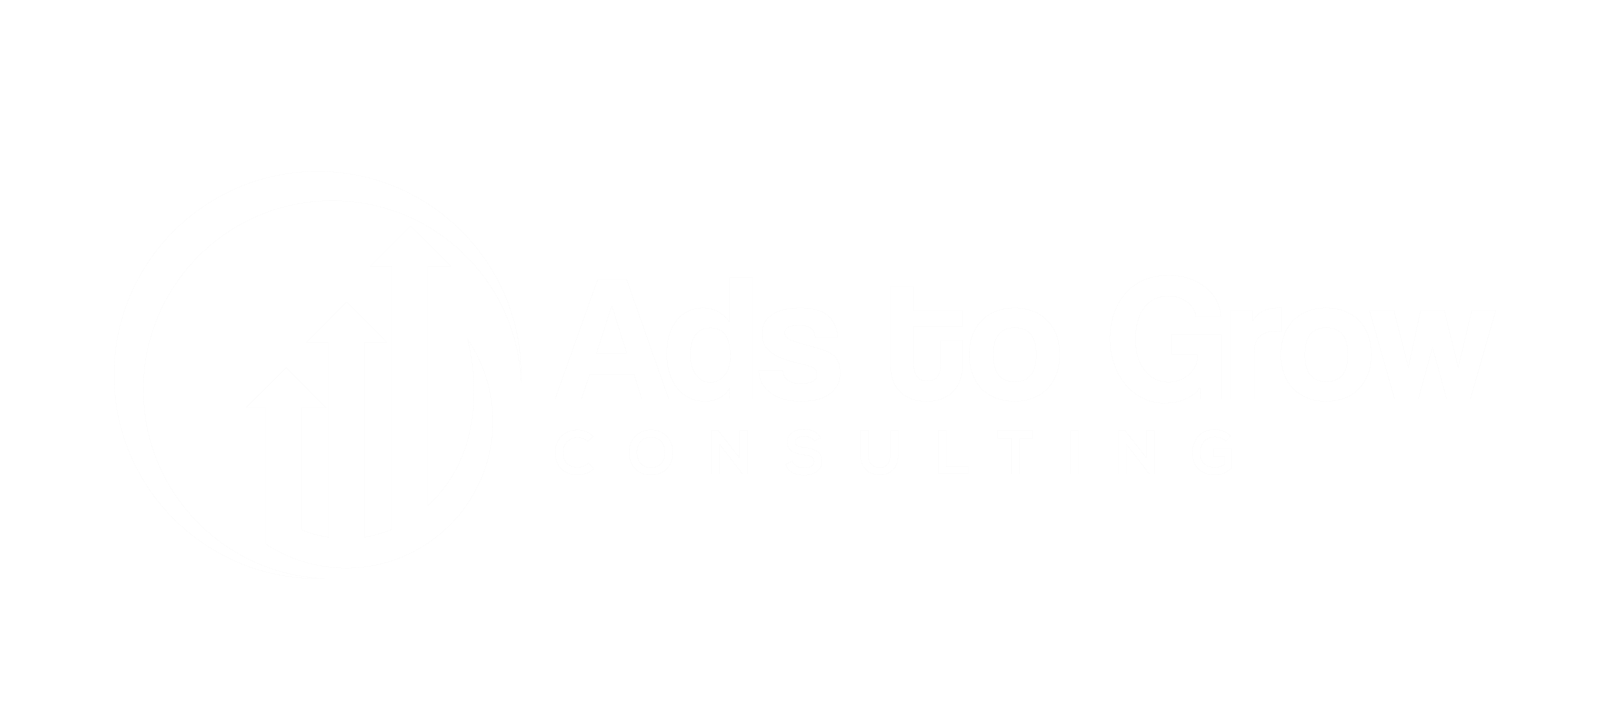 Contact Ads to Grow